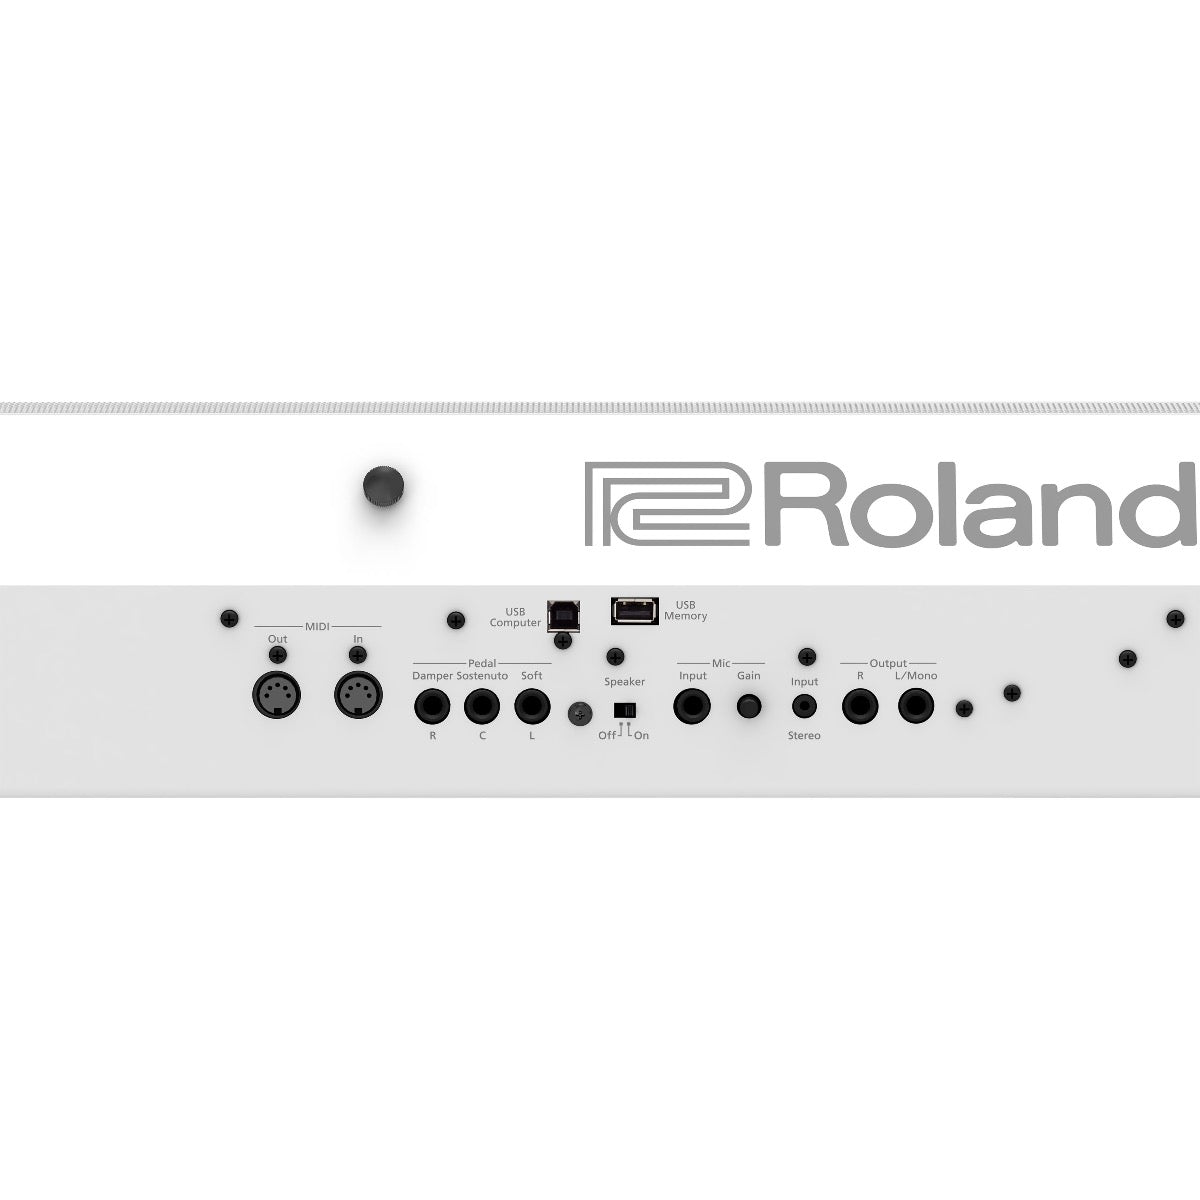 Close-up rear view of Roland FP-90X Digital Piano - White showing audio and data connections